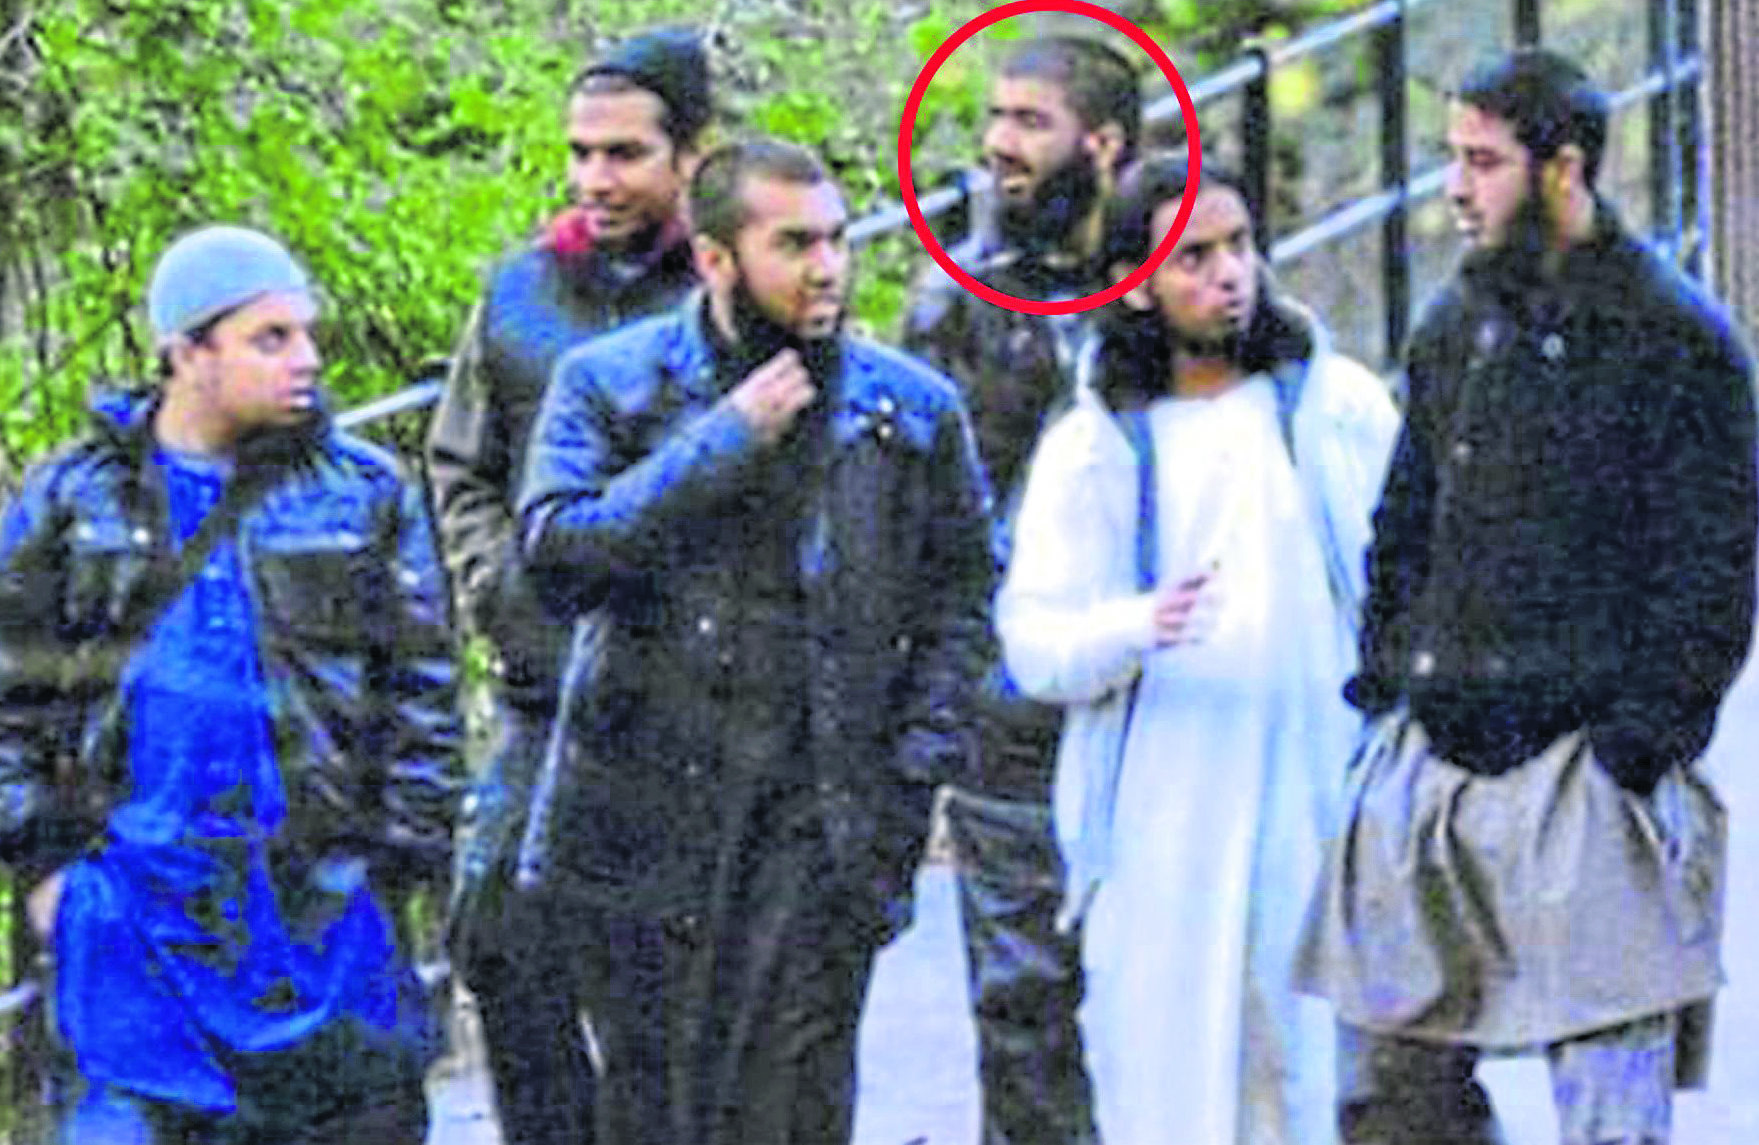 Police surveillance image from 2012 trial of Usman Khan - Seen here with other members of the gang who plotted to blow up the stock exchange.